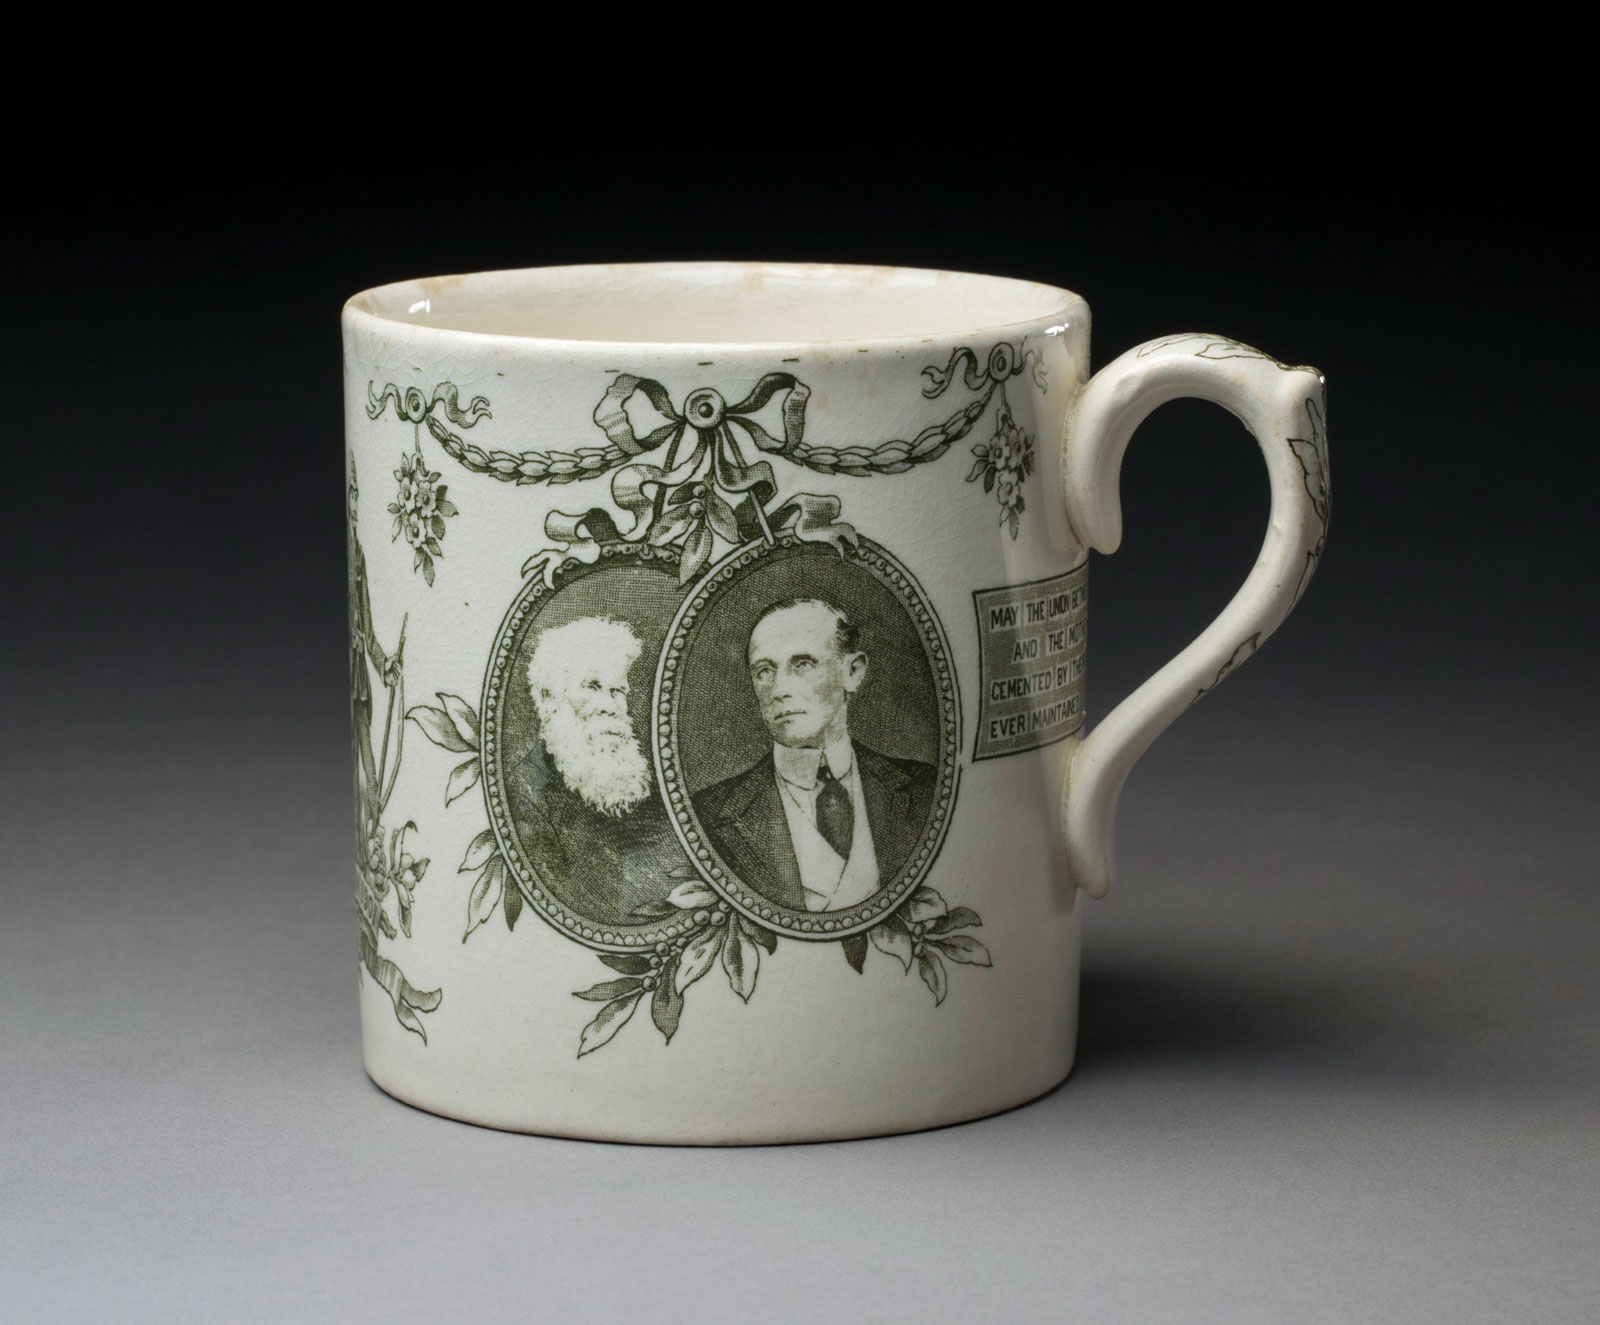 A commemorative Federation mug with portraits of Sir Henry Parkes and the Governor-General, Lord Hopetoun.